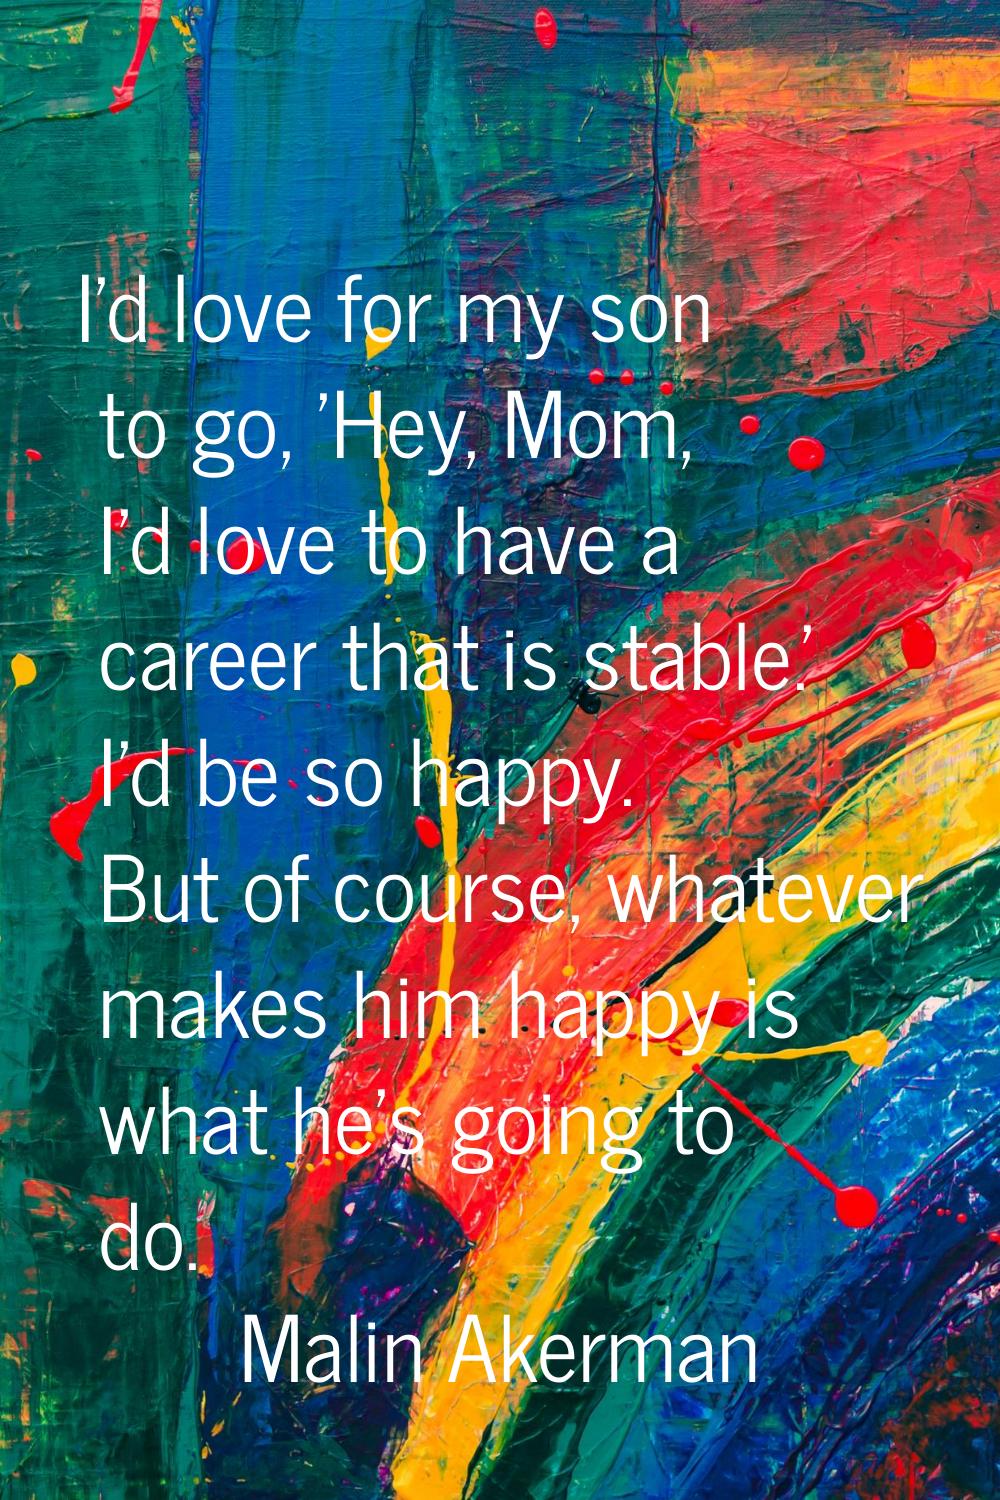 I'd love for my son to go, 'Hey, Mom, I'd love to have a career that is stable.' I'd be so happy. B